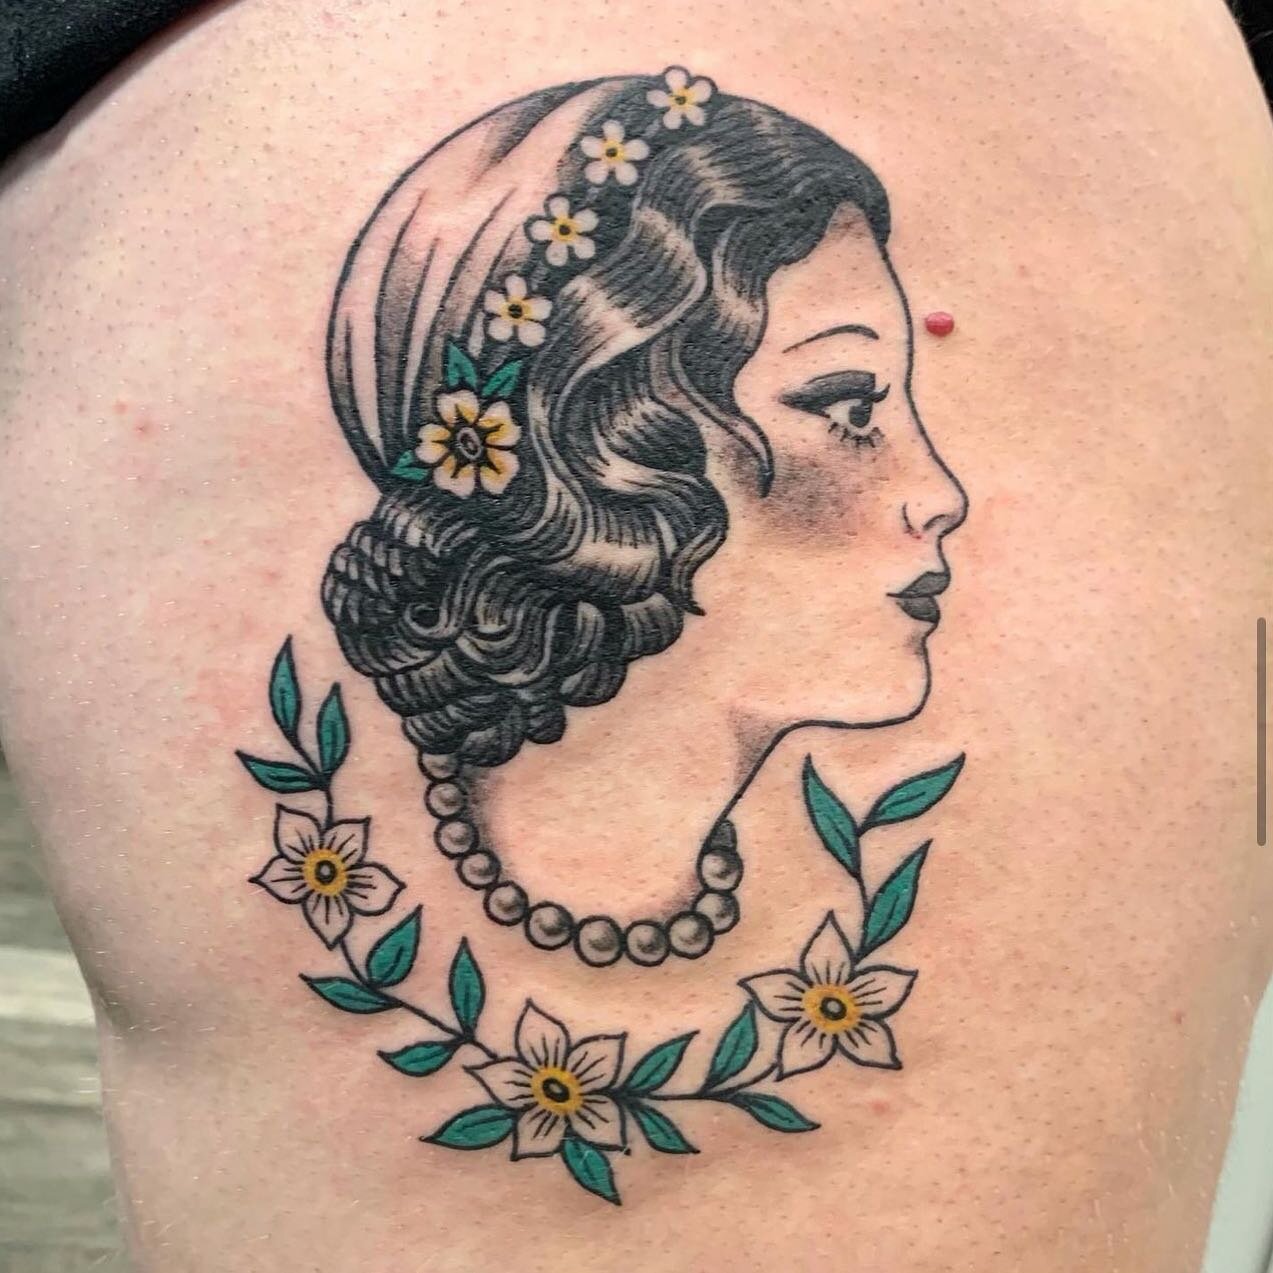 This beauty done by🖤 @wraith_ 🖤She specializes in vintage inspired black work 🌚 Message us to book with her !